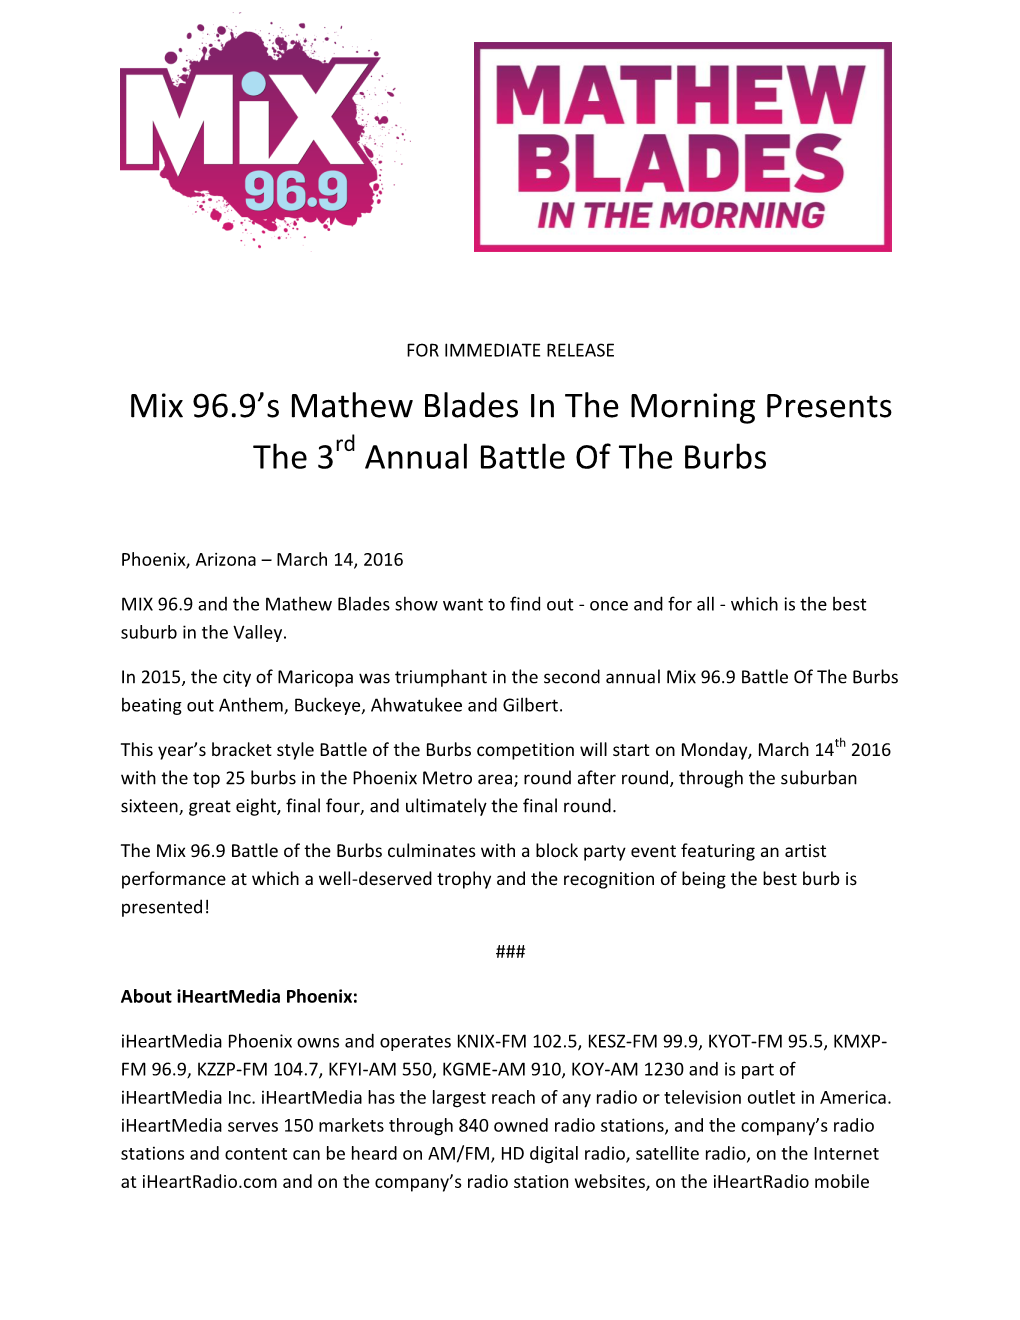 Mix 96.9'S Mathew Blades in the Morning Presents the 3 Annual